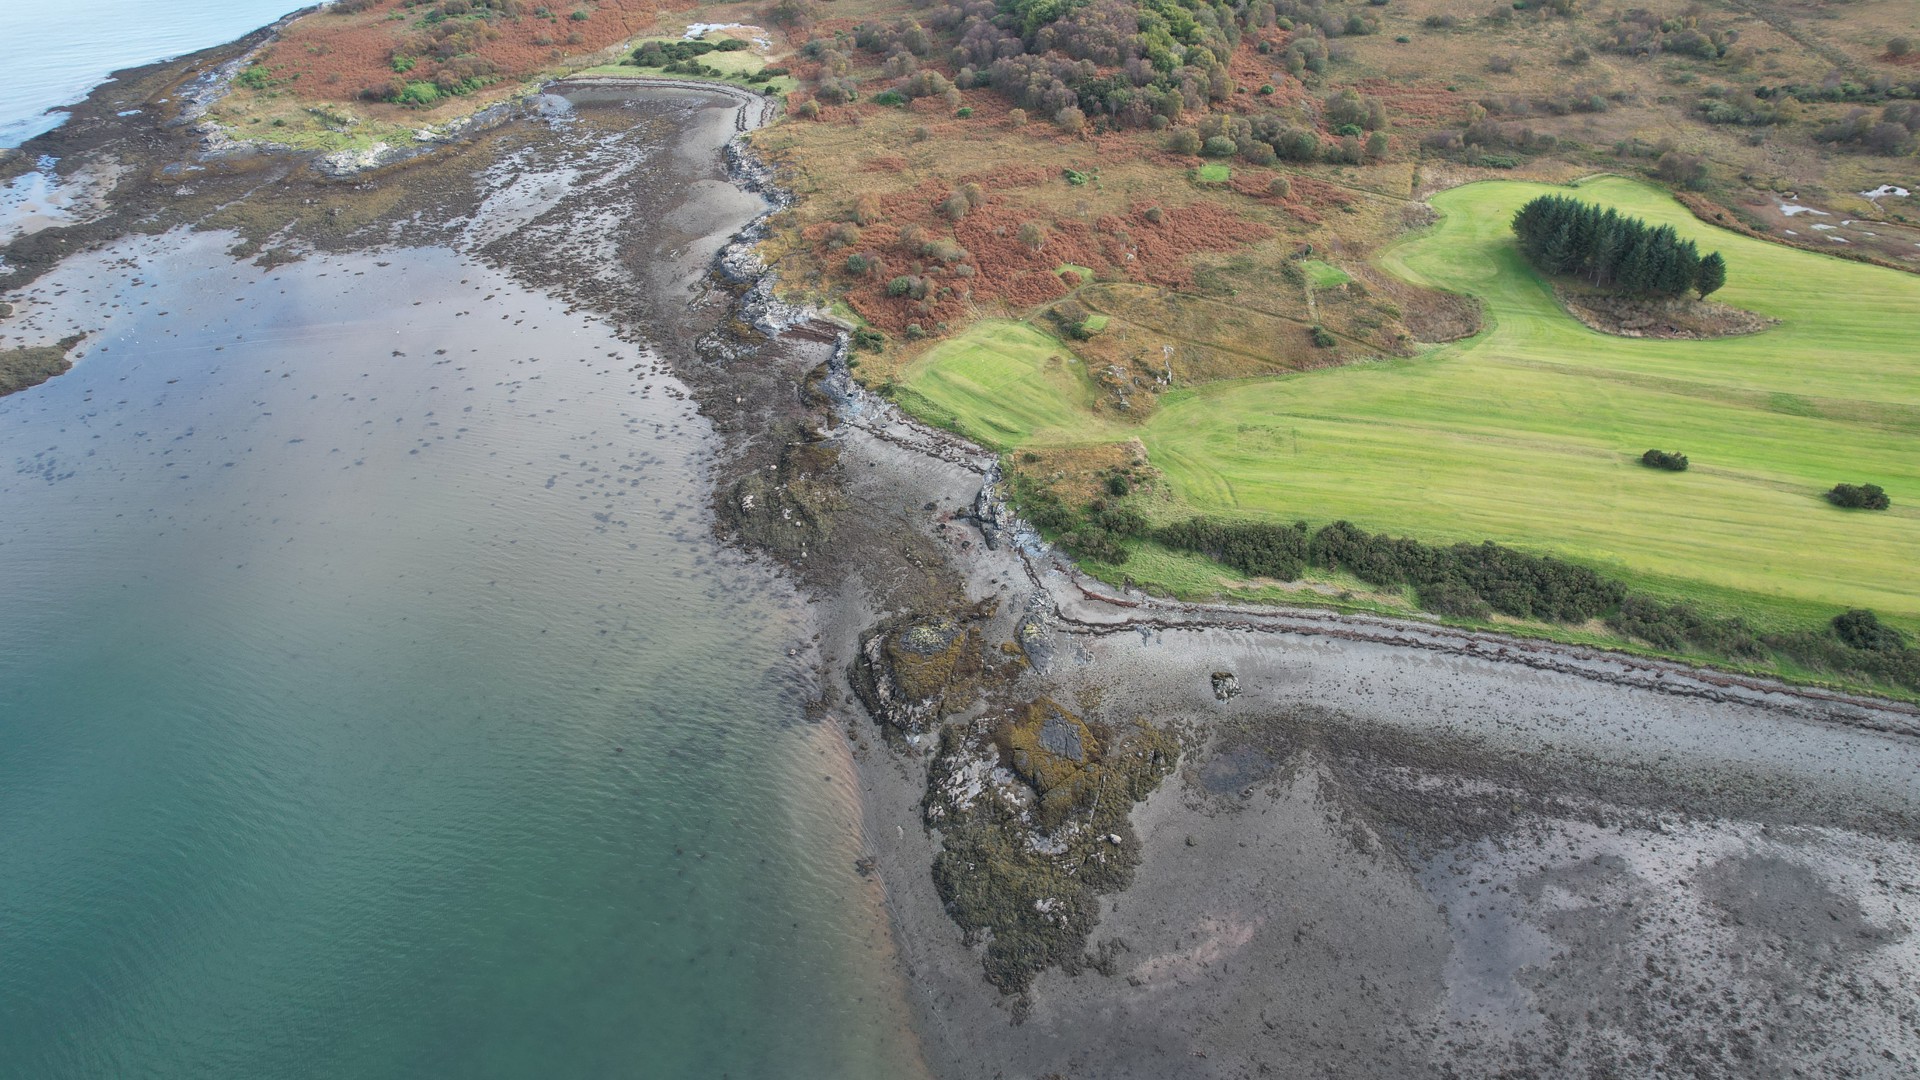 Background image - DJI 0817_Drone image of beach on Bute